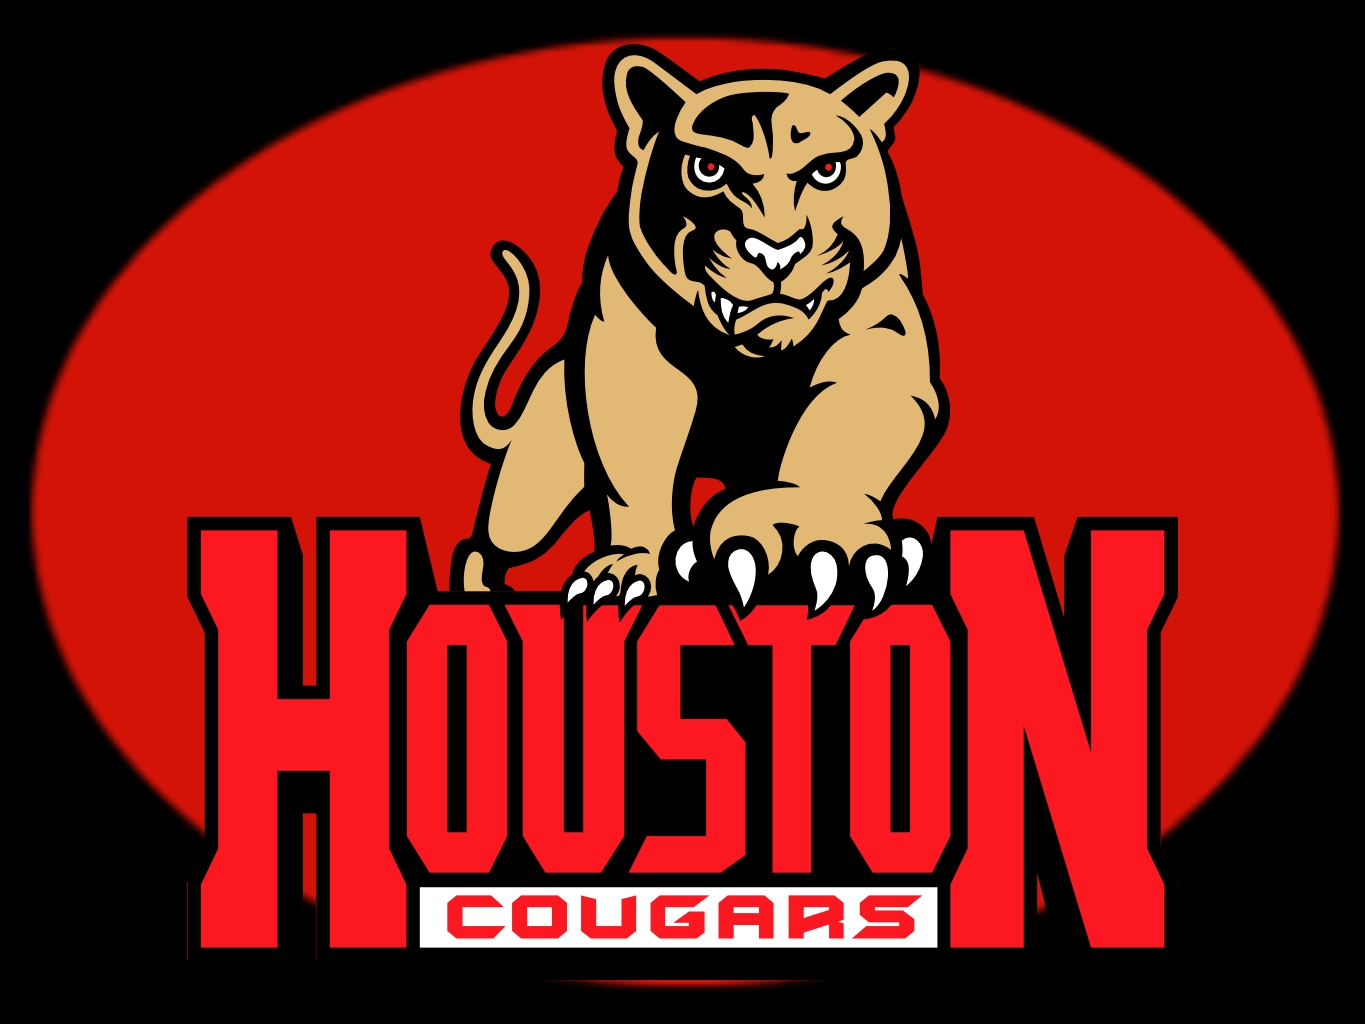 Houston Cougars Tickets